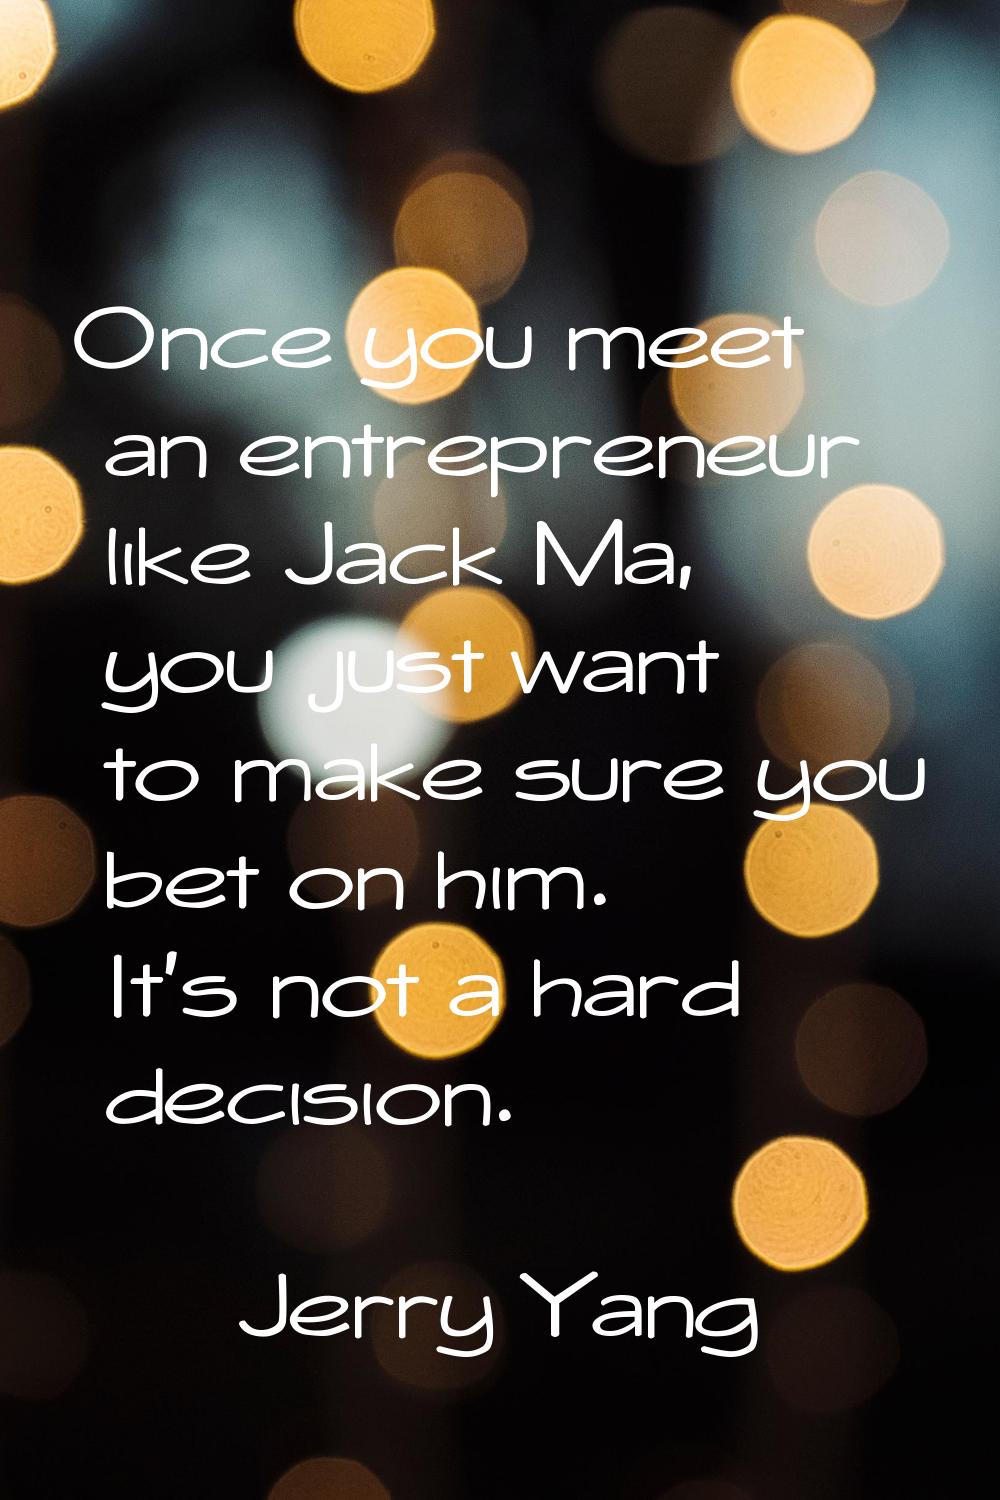 Once you meet an entrepreneur like Jack Ma, you just want to make sure you bet on him. It's not a h